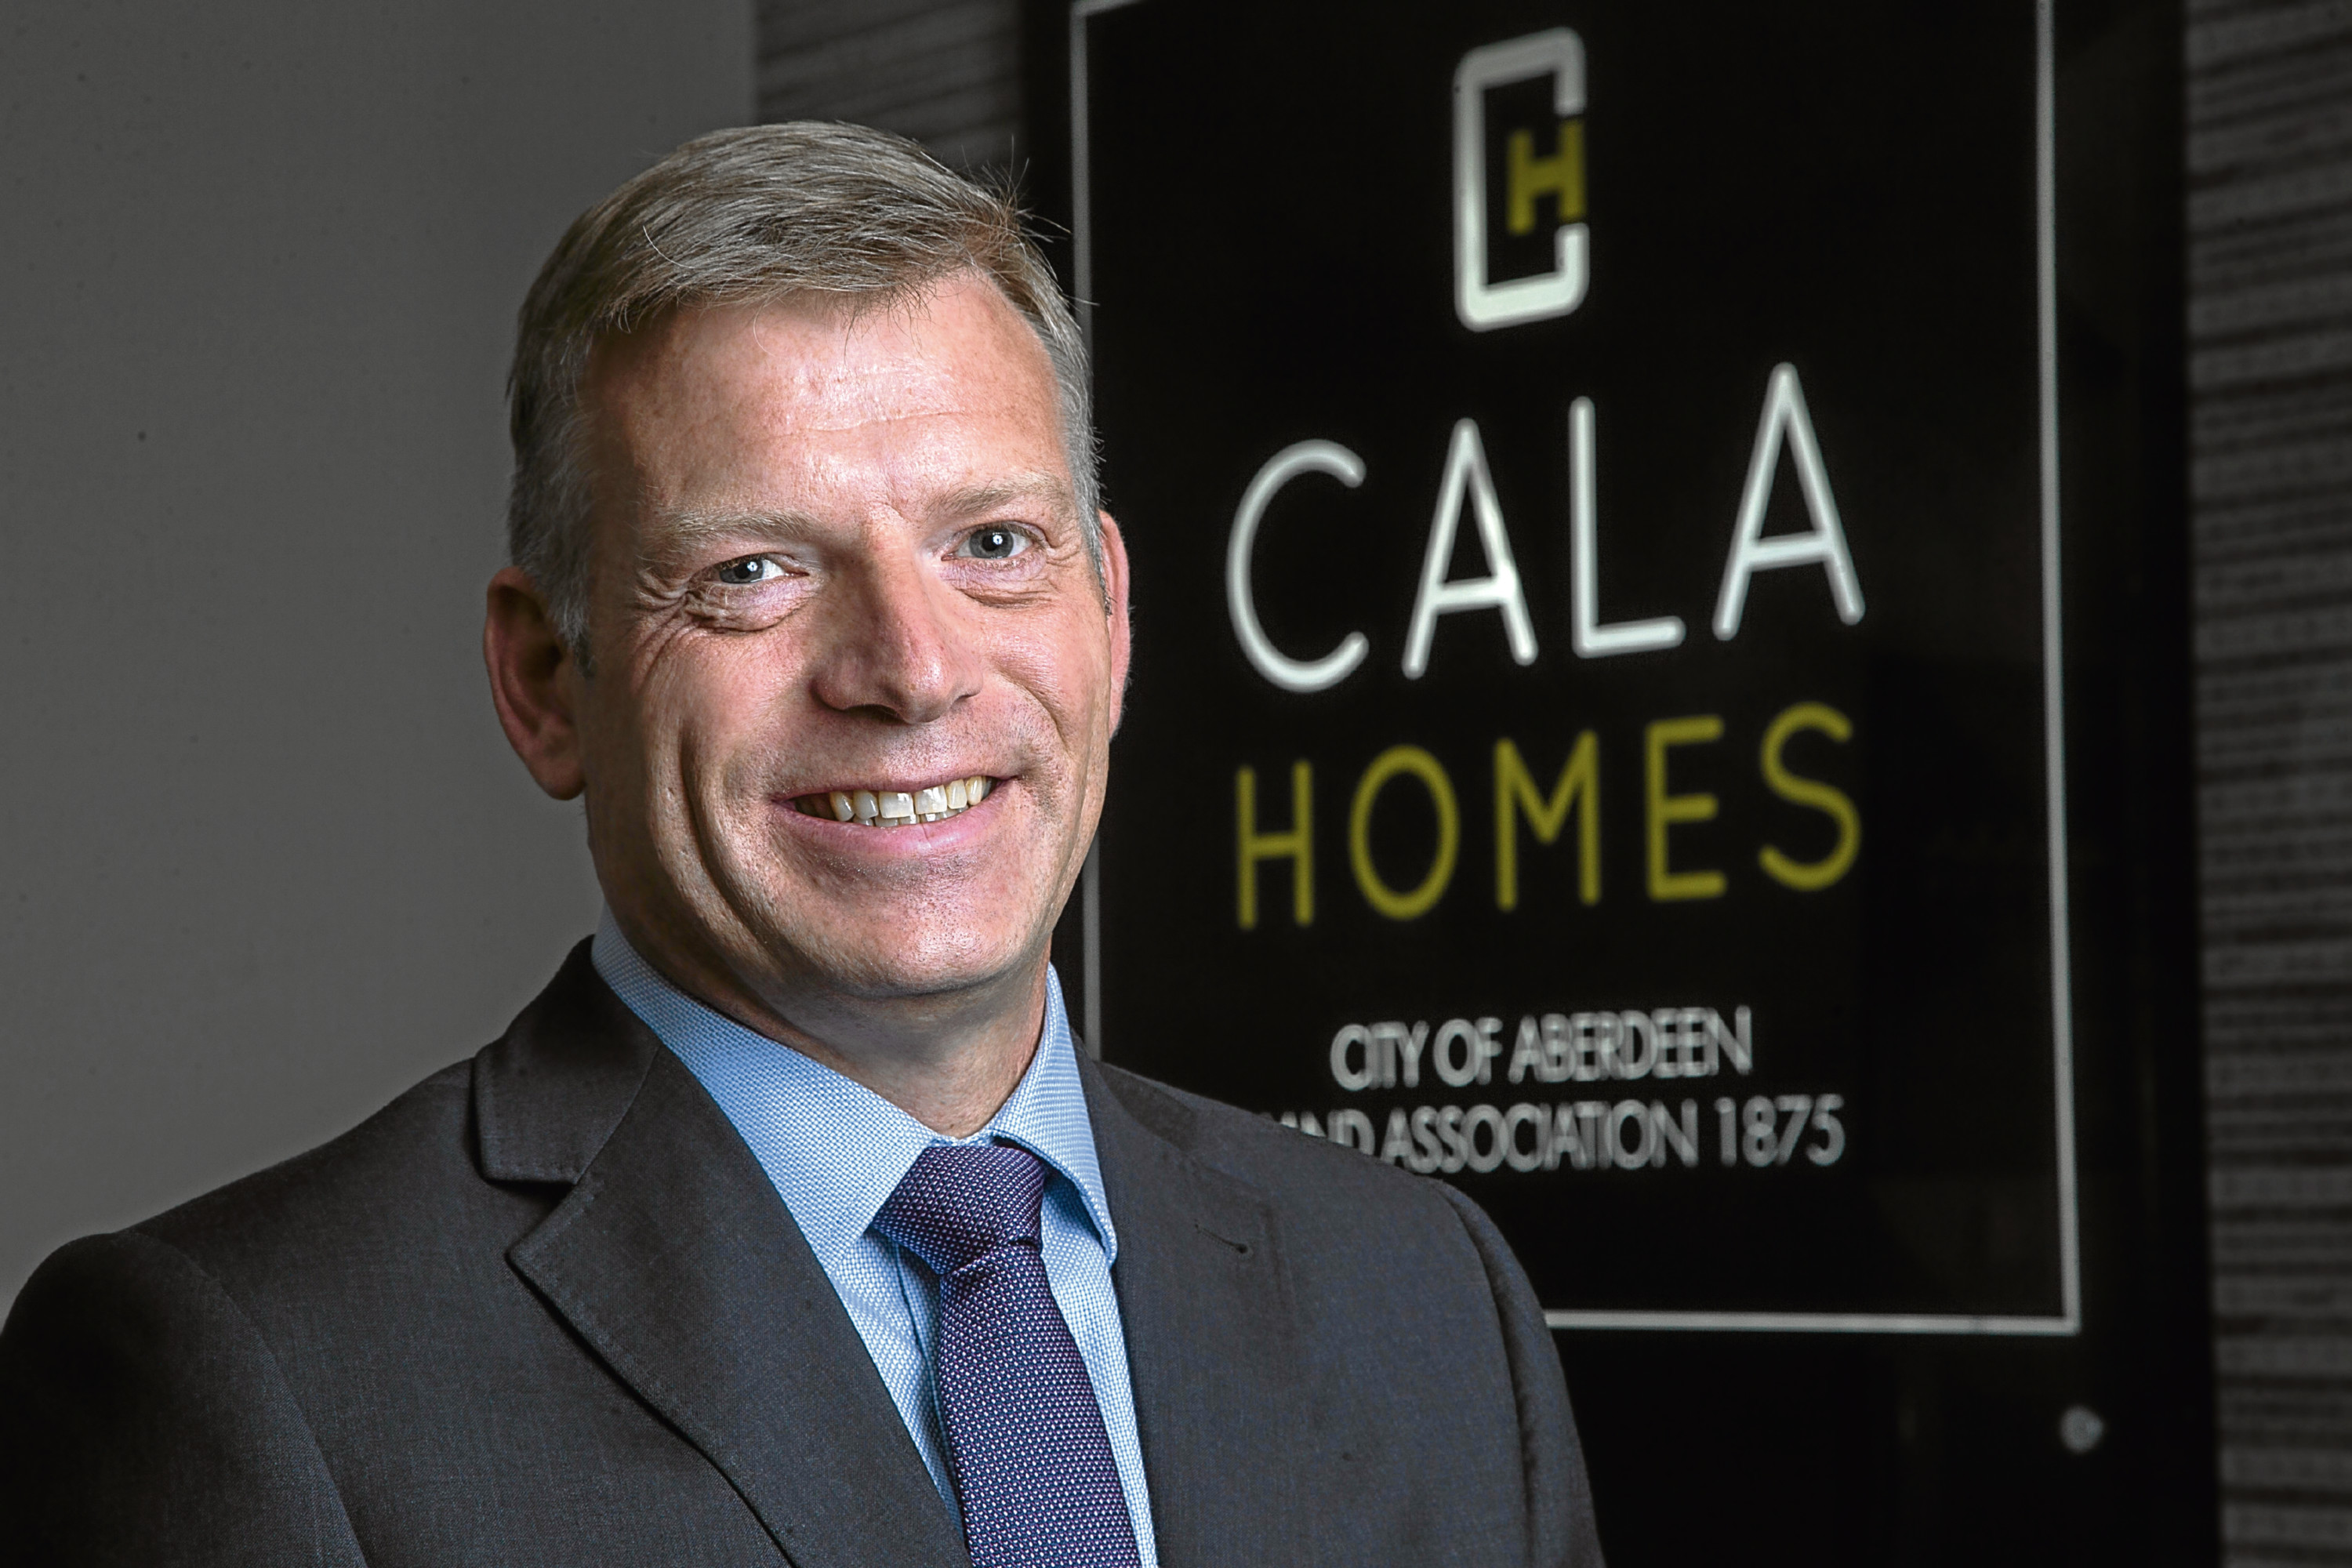 CALA managing director in the north, Mike Naysmith